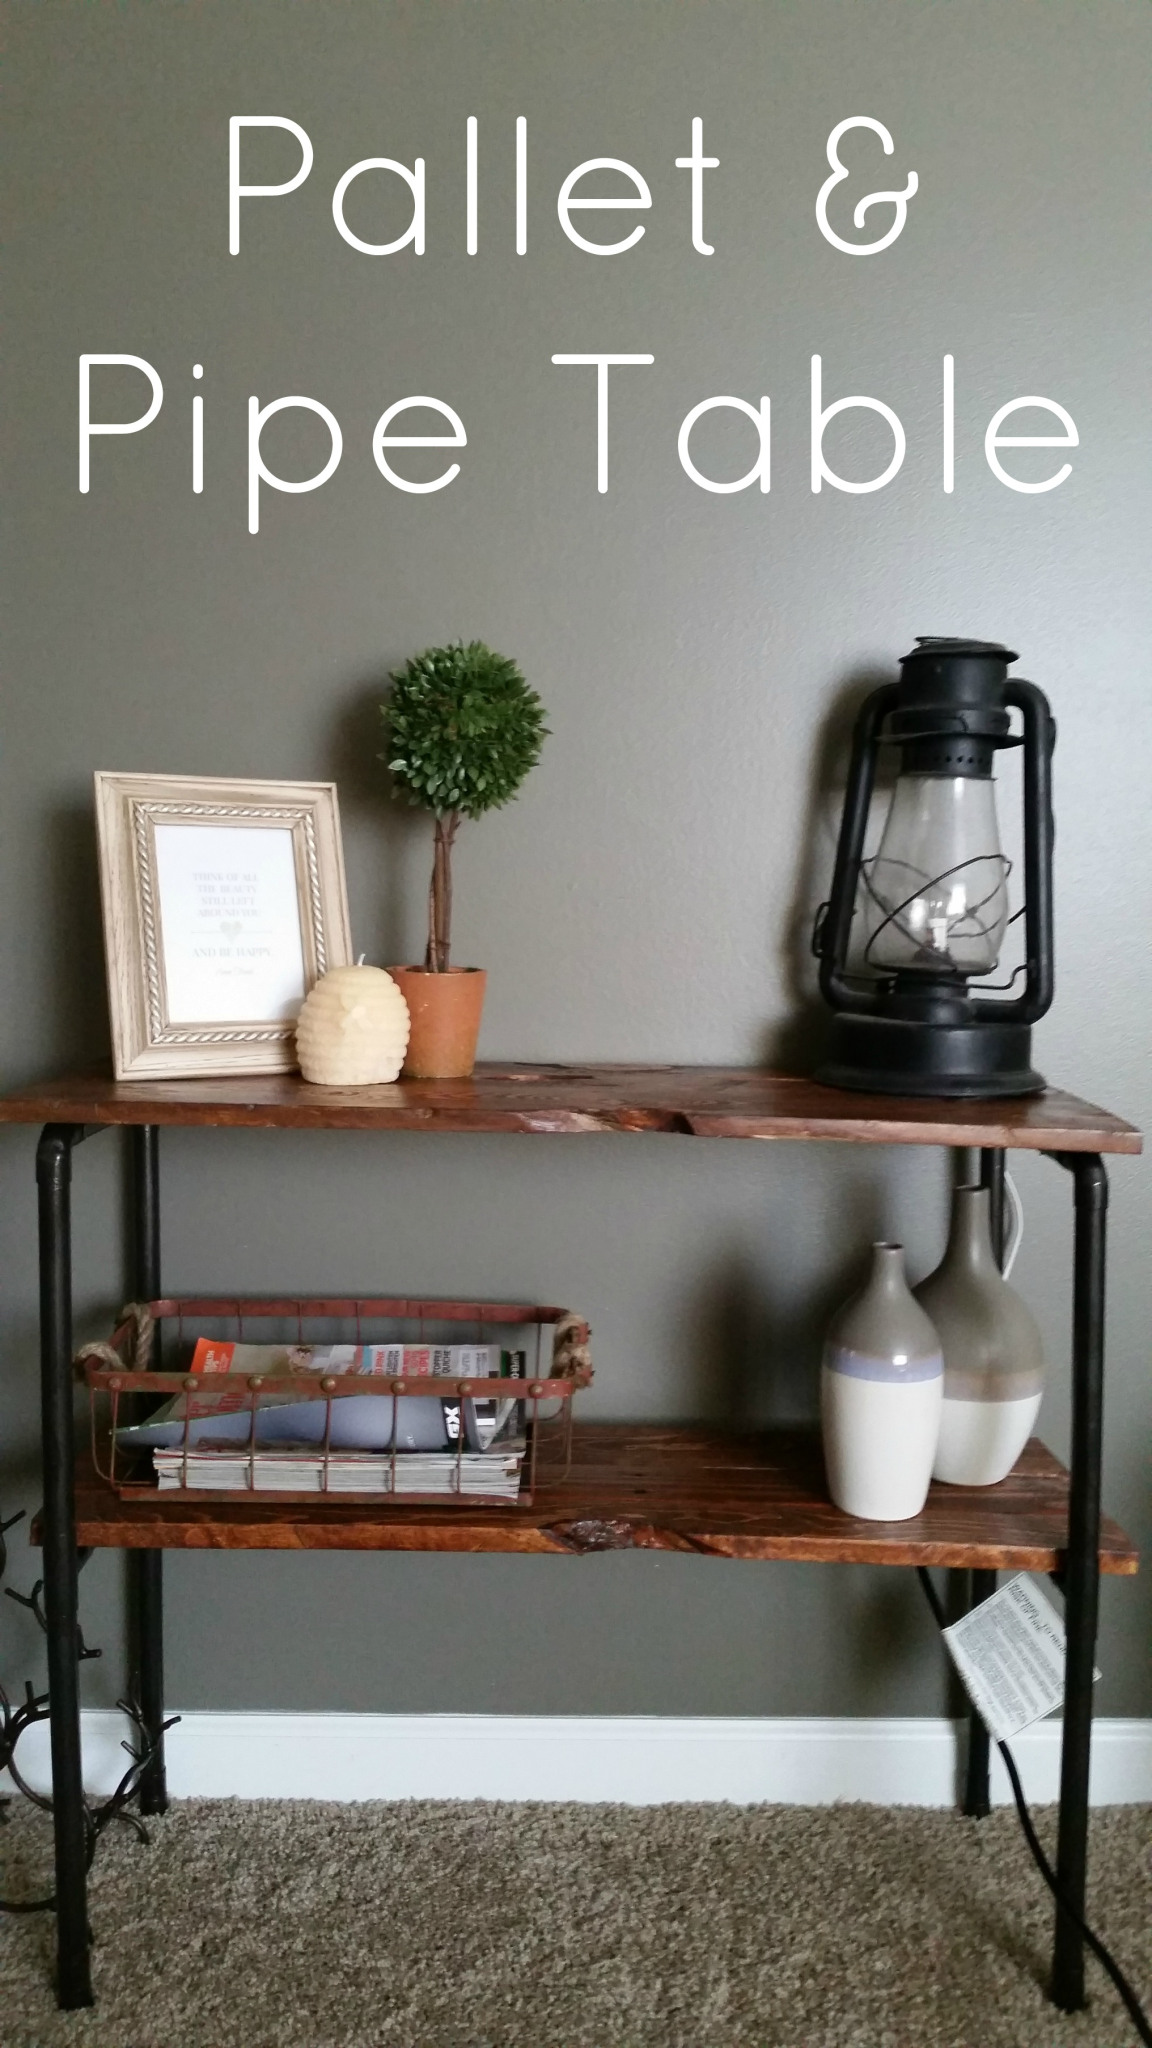 pallet-and-pipe-table